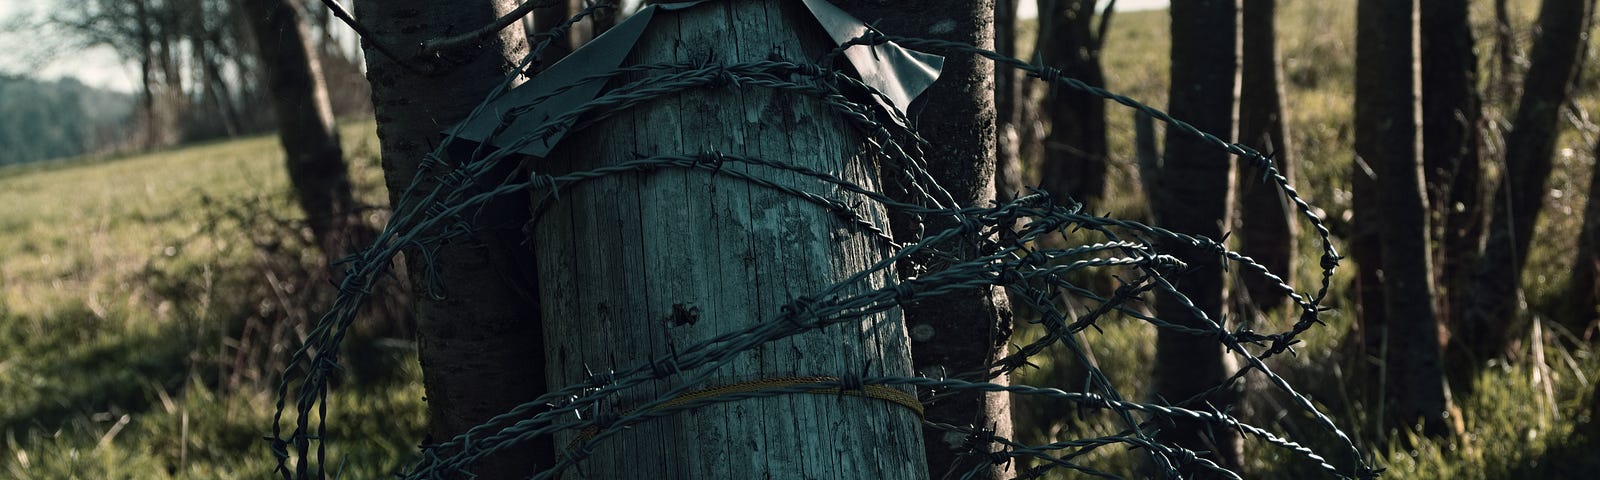 A fence post with barbed wire photographed in hypothermia light.